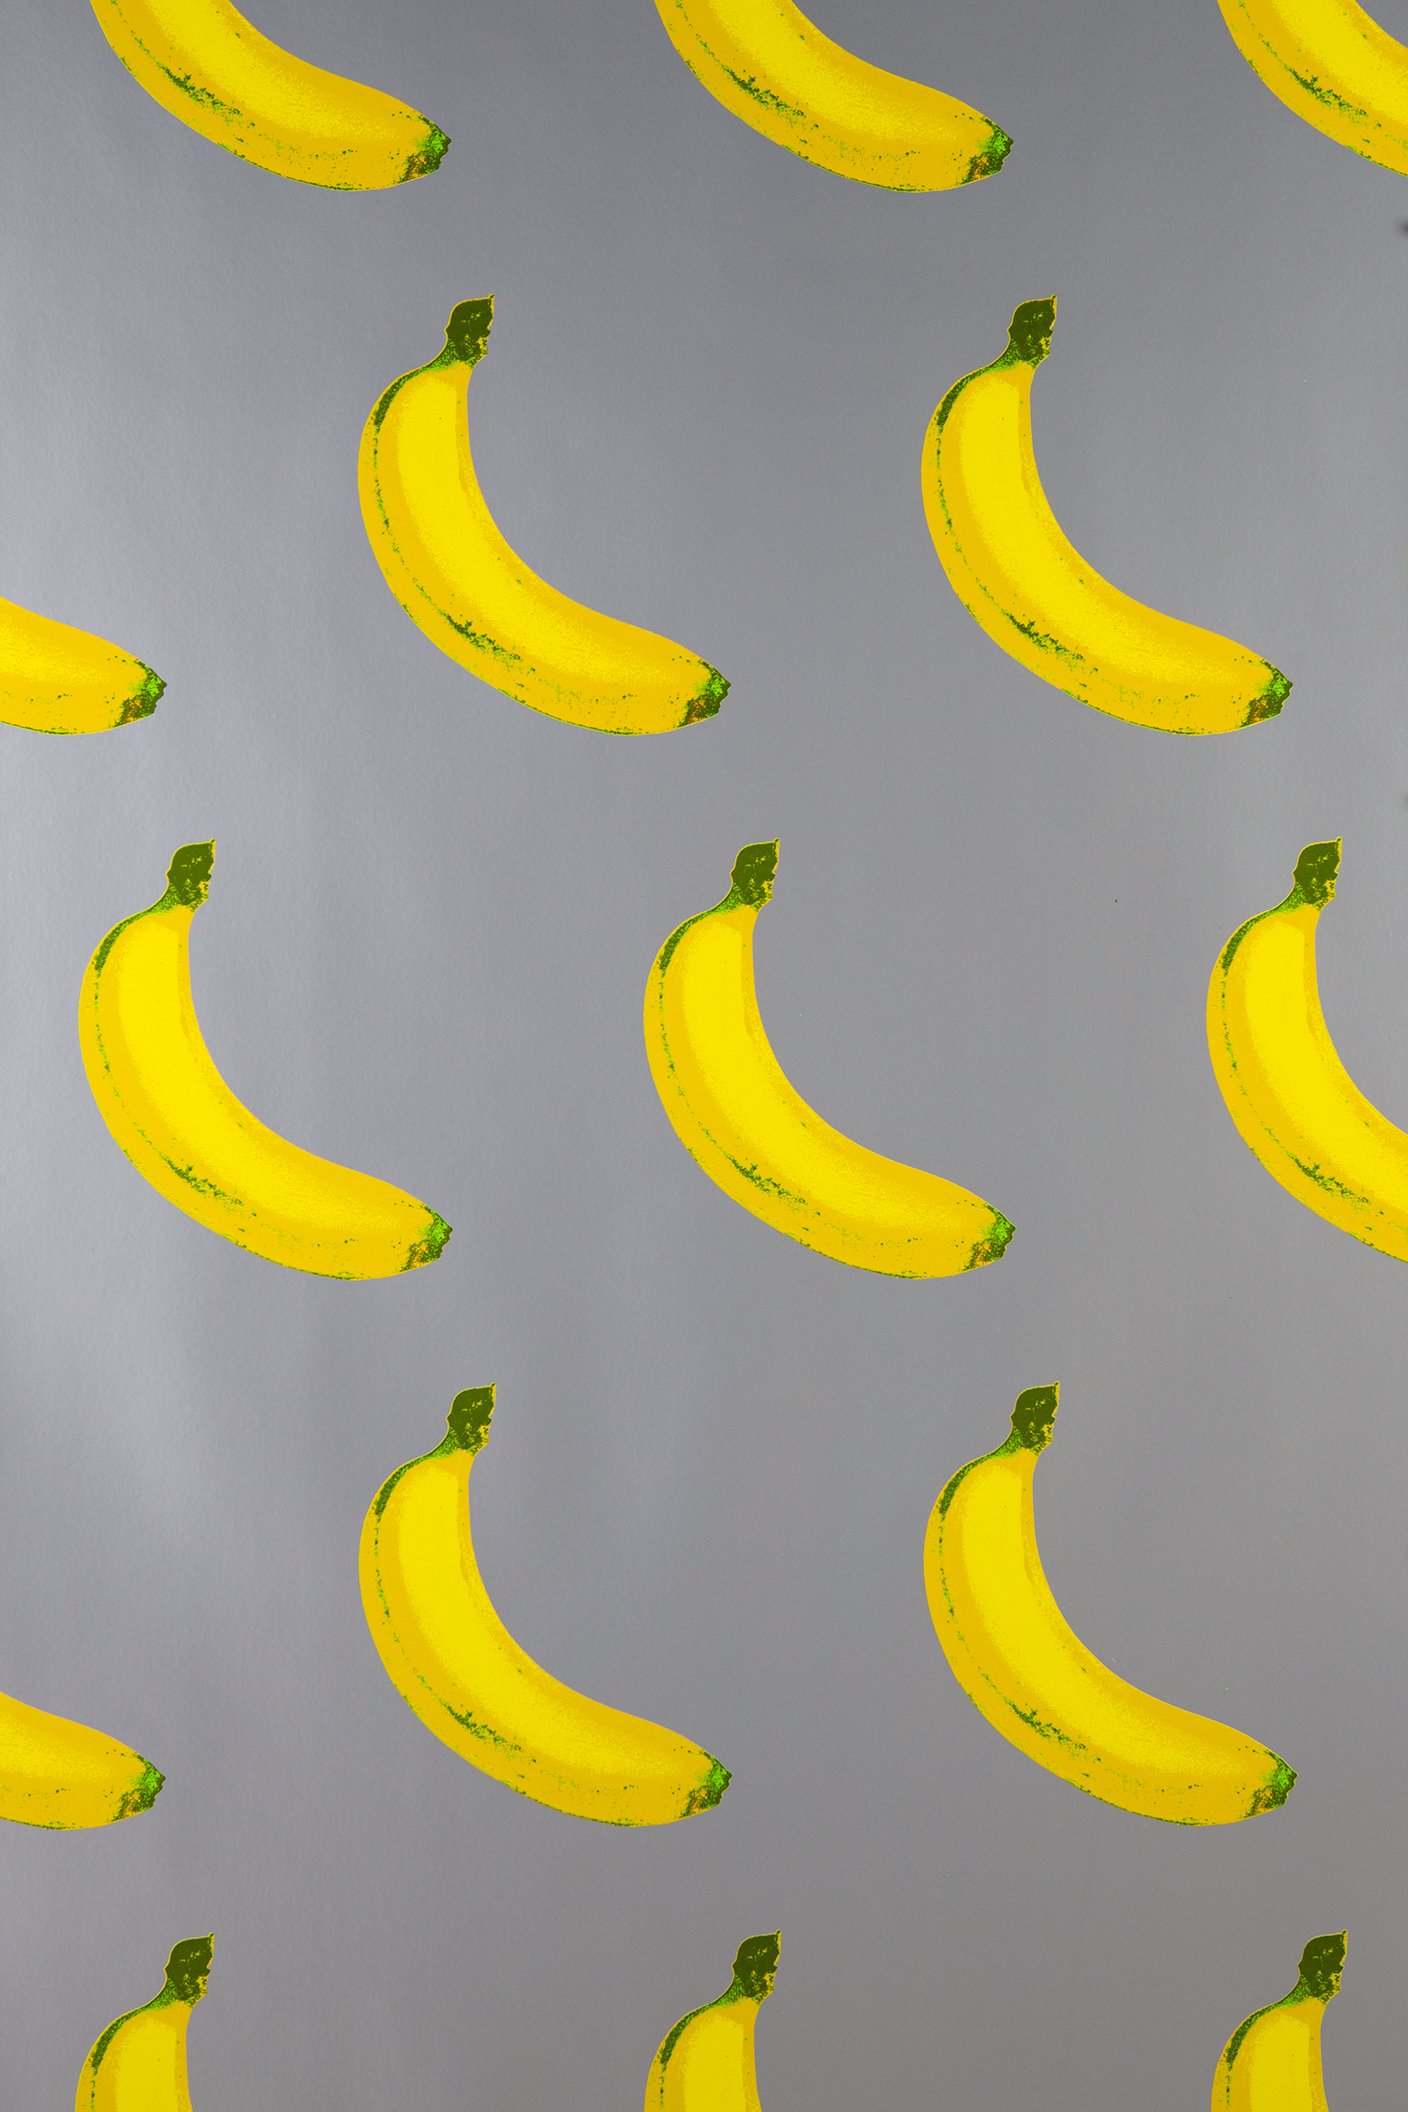 banana 1080P 2k 4k HD wallpapers backgrounds free download  Rare  Gallery